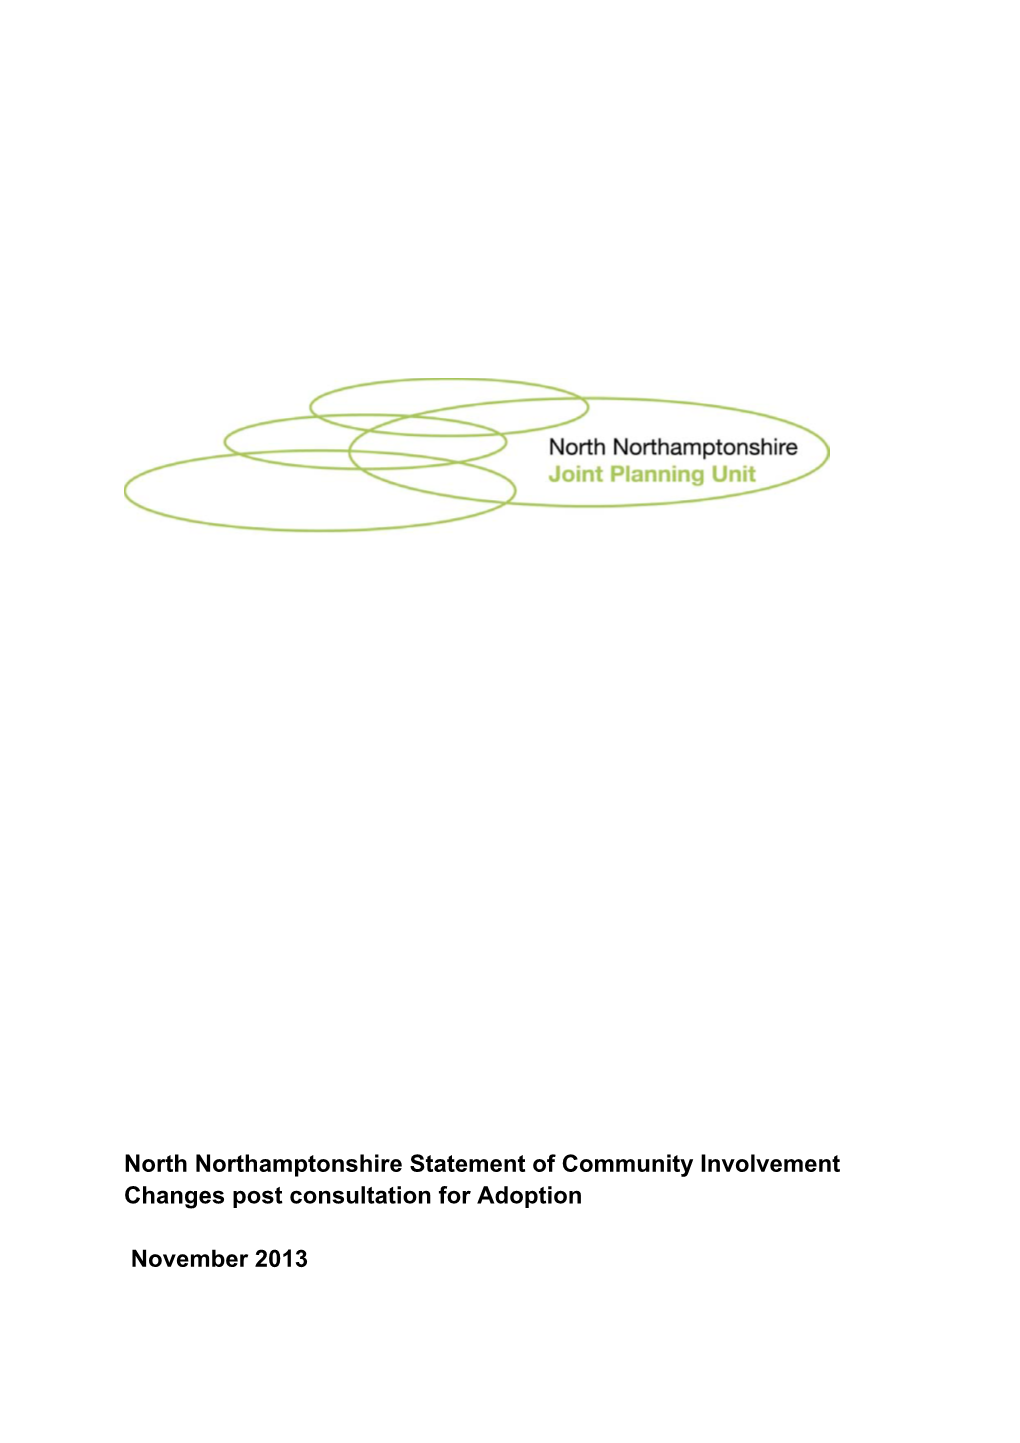 North Northamptonshire Statement of Community Involvement Changes Post Consultation for Adoption